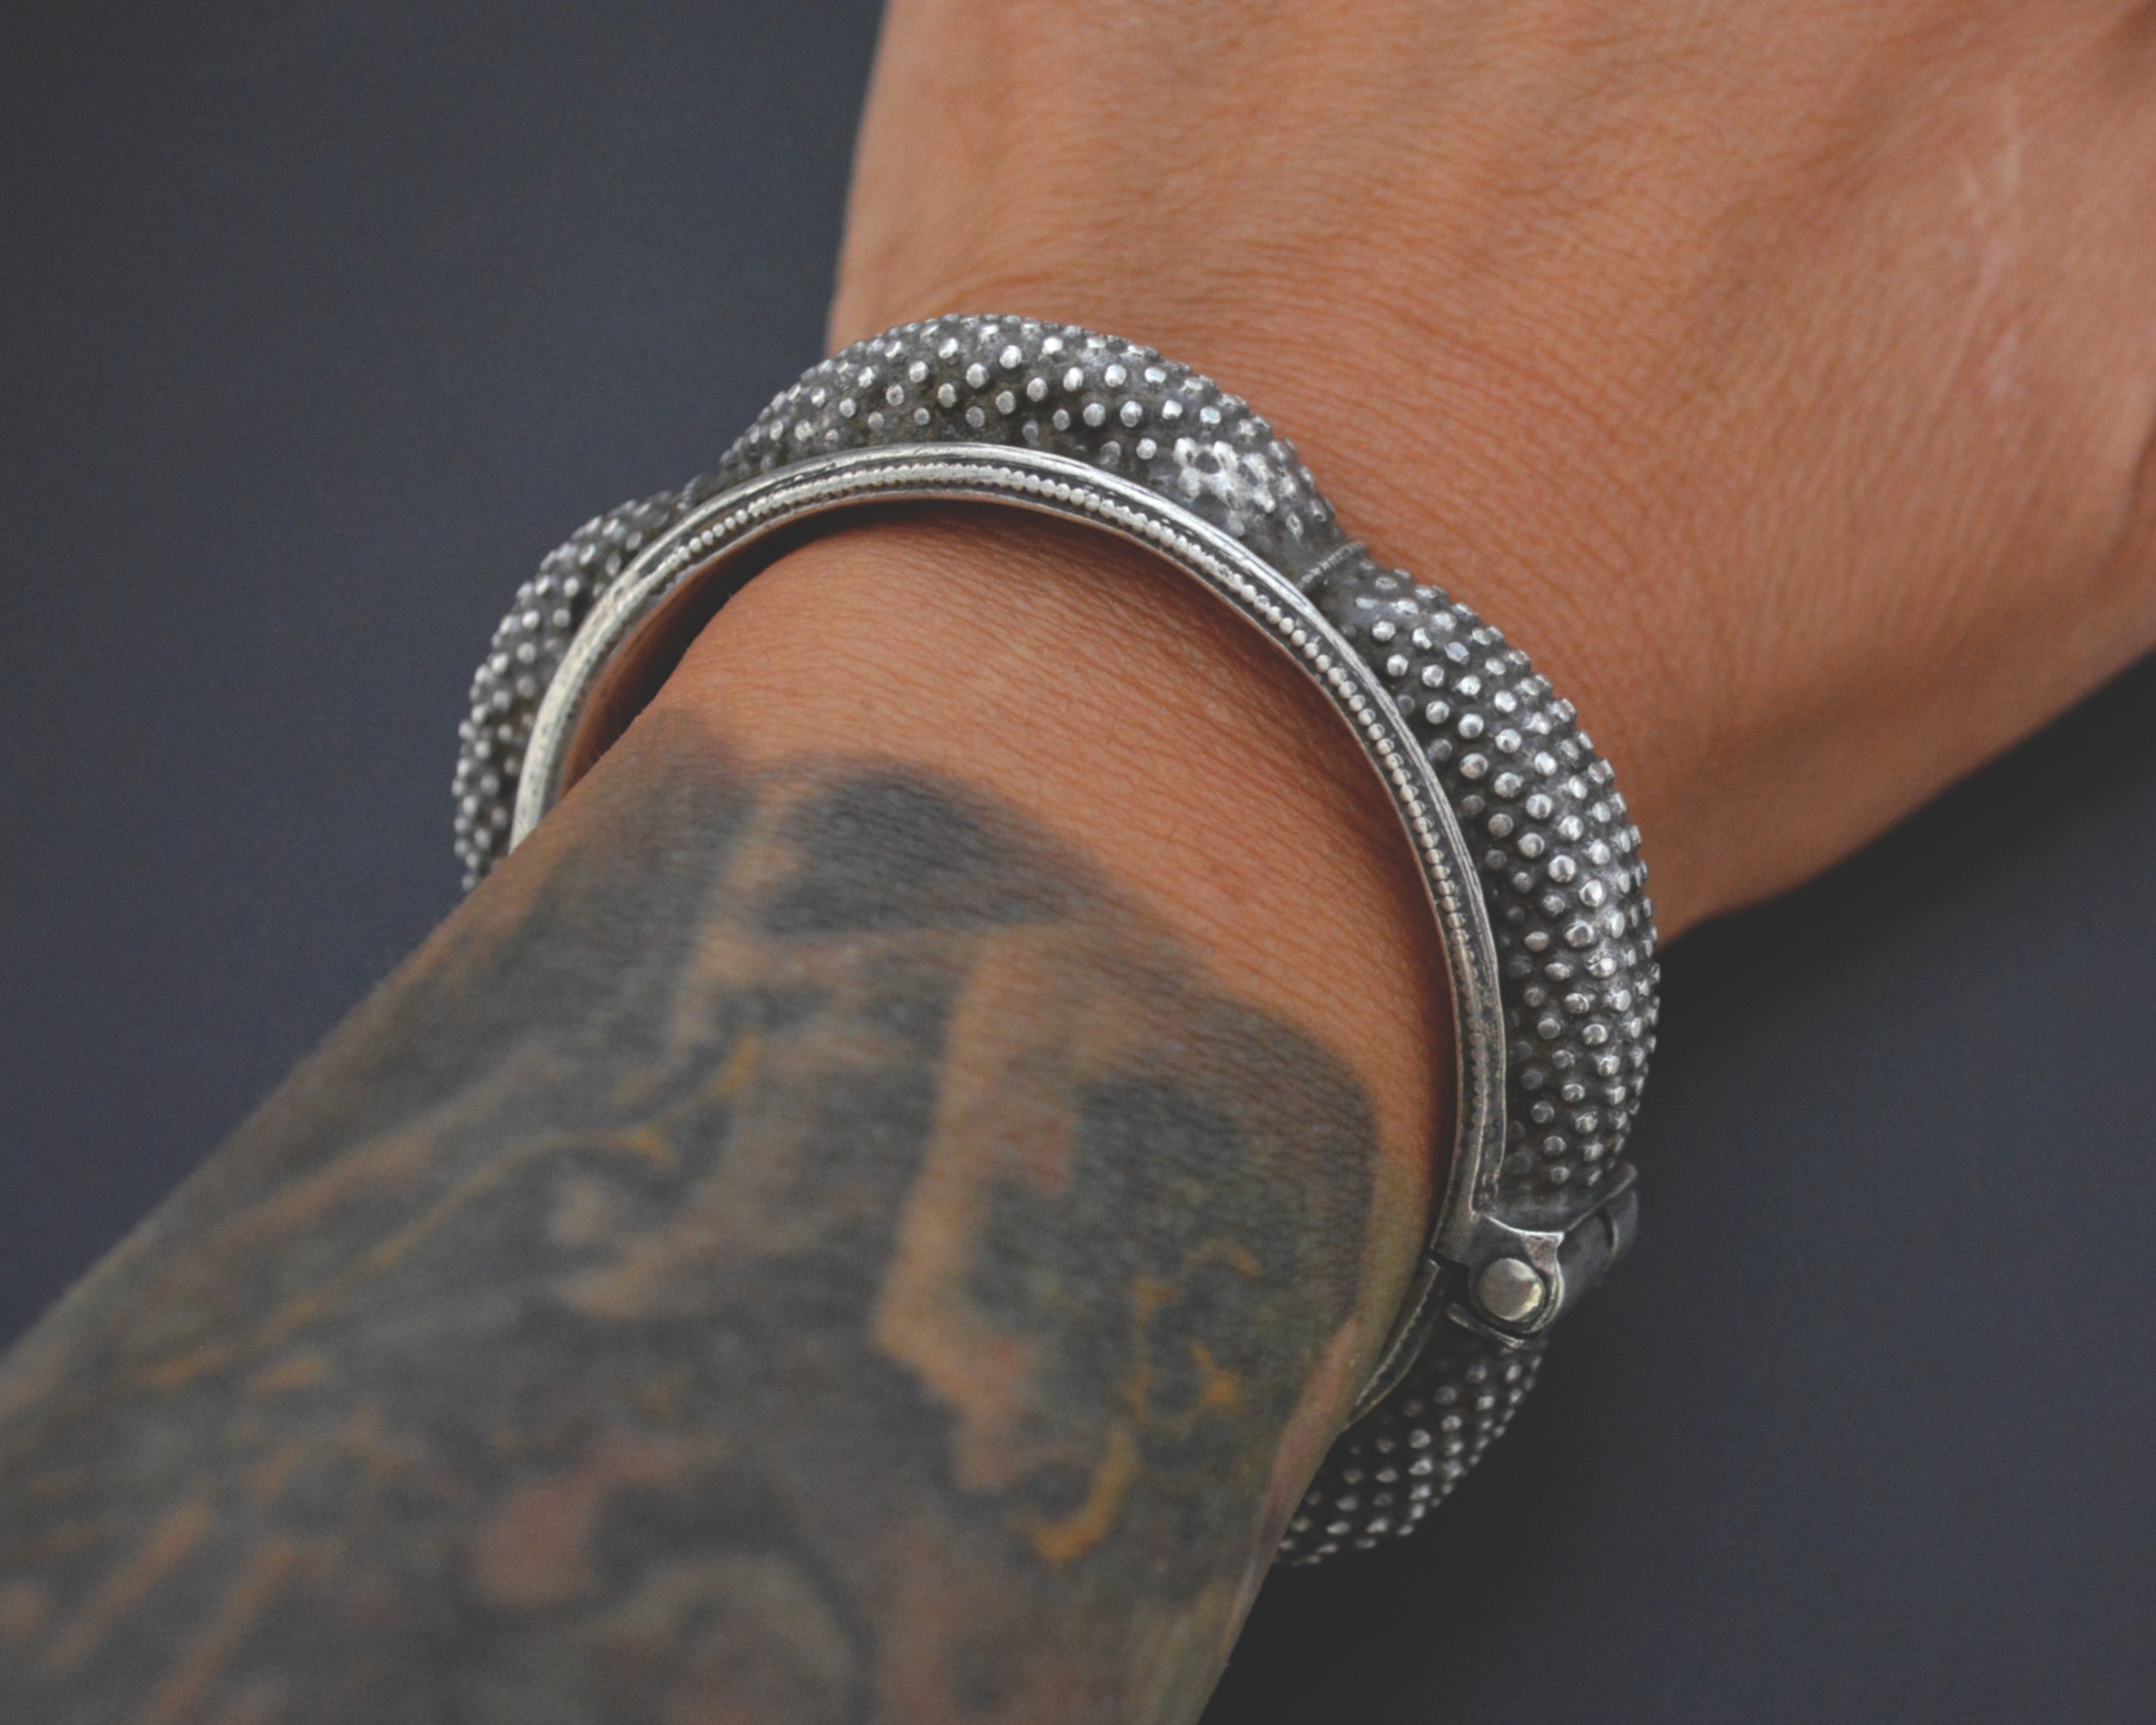 Small Ethnic Tribal Indian Silver Bracelet - Hinged